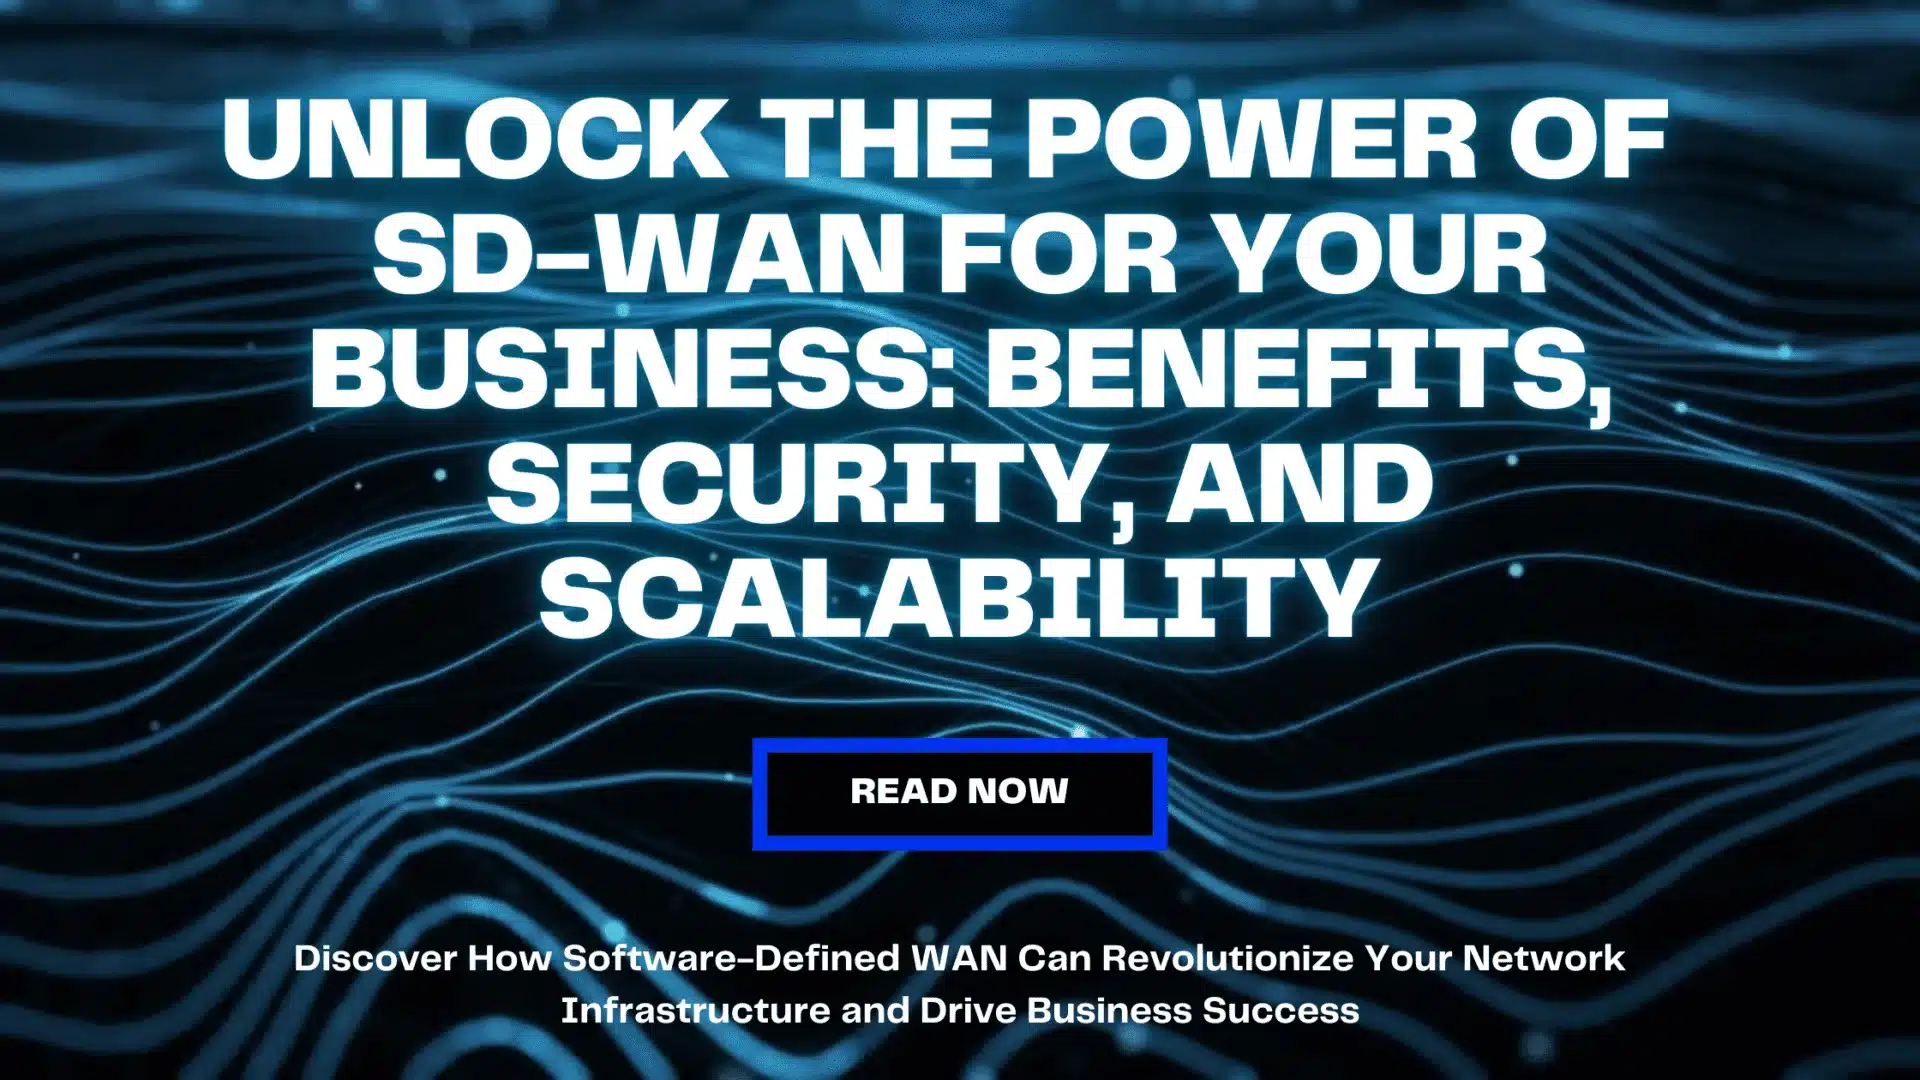 unlock the power of sd-wan for your business: benefits, security, and scalability. SD-WAN Network Infrastructure Business Networking Cloud-based Applications Network Security Scalable Networking Network Performance WAN Solutions Managed Networking IT Services